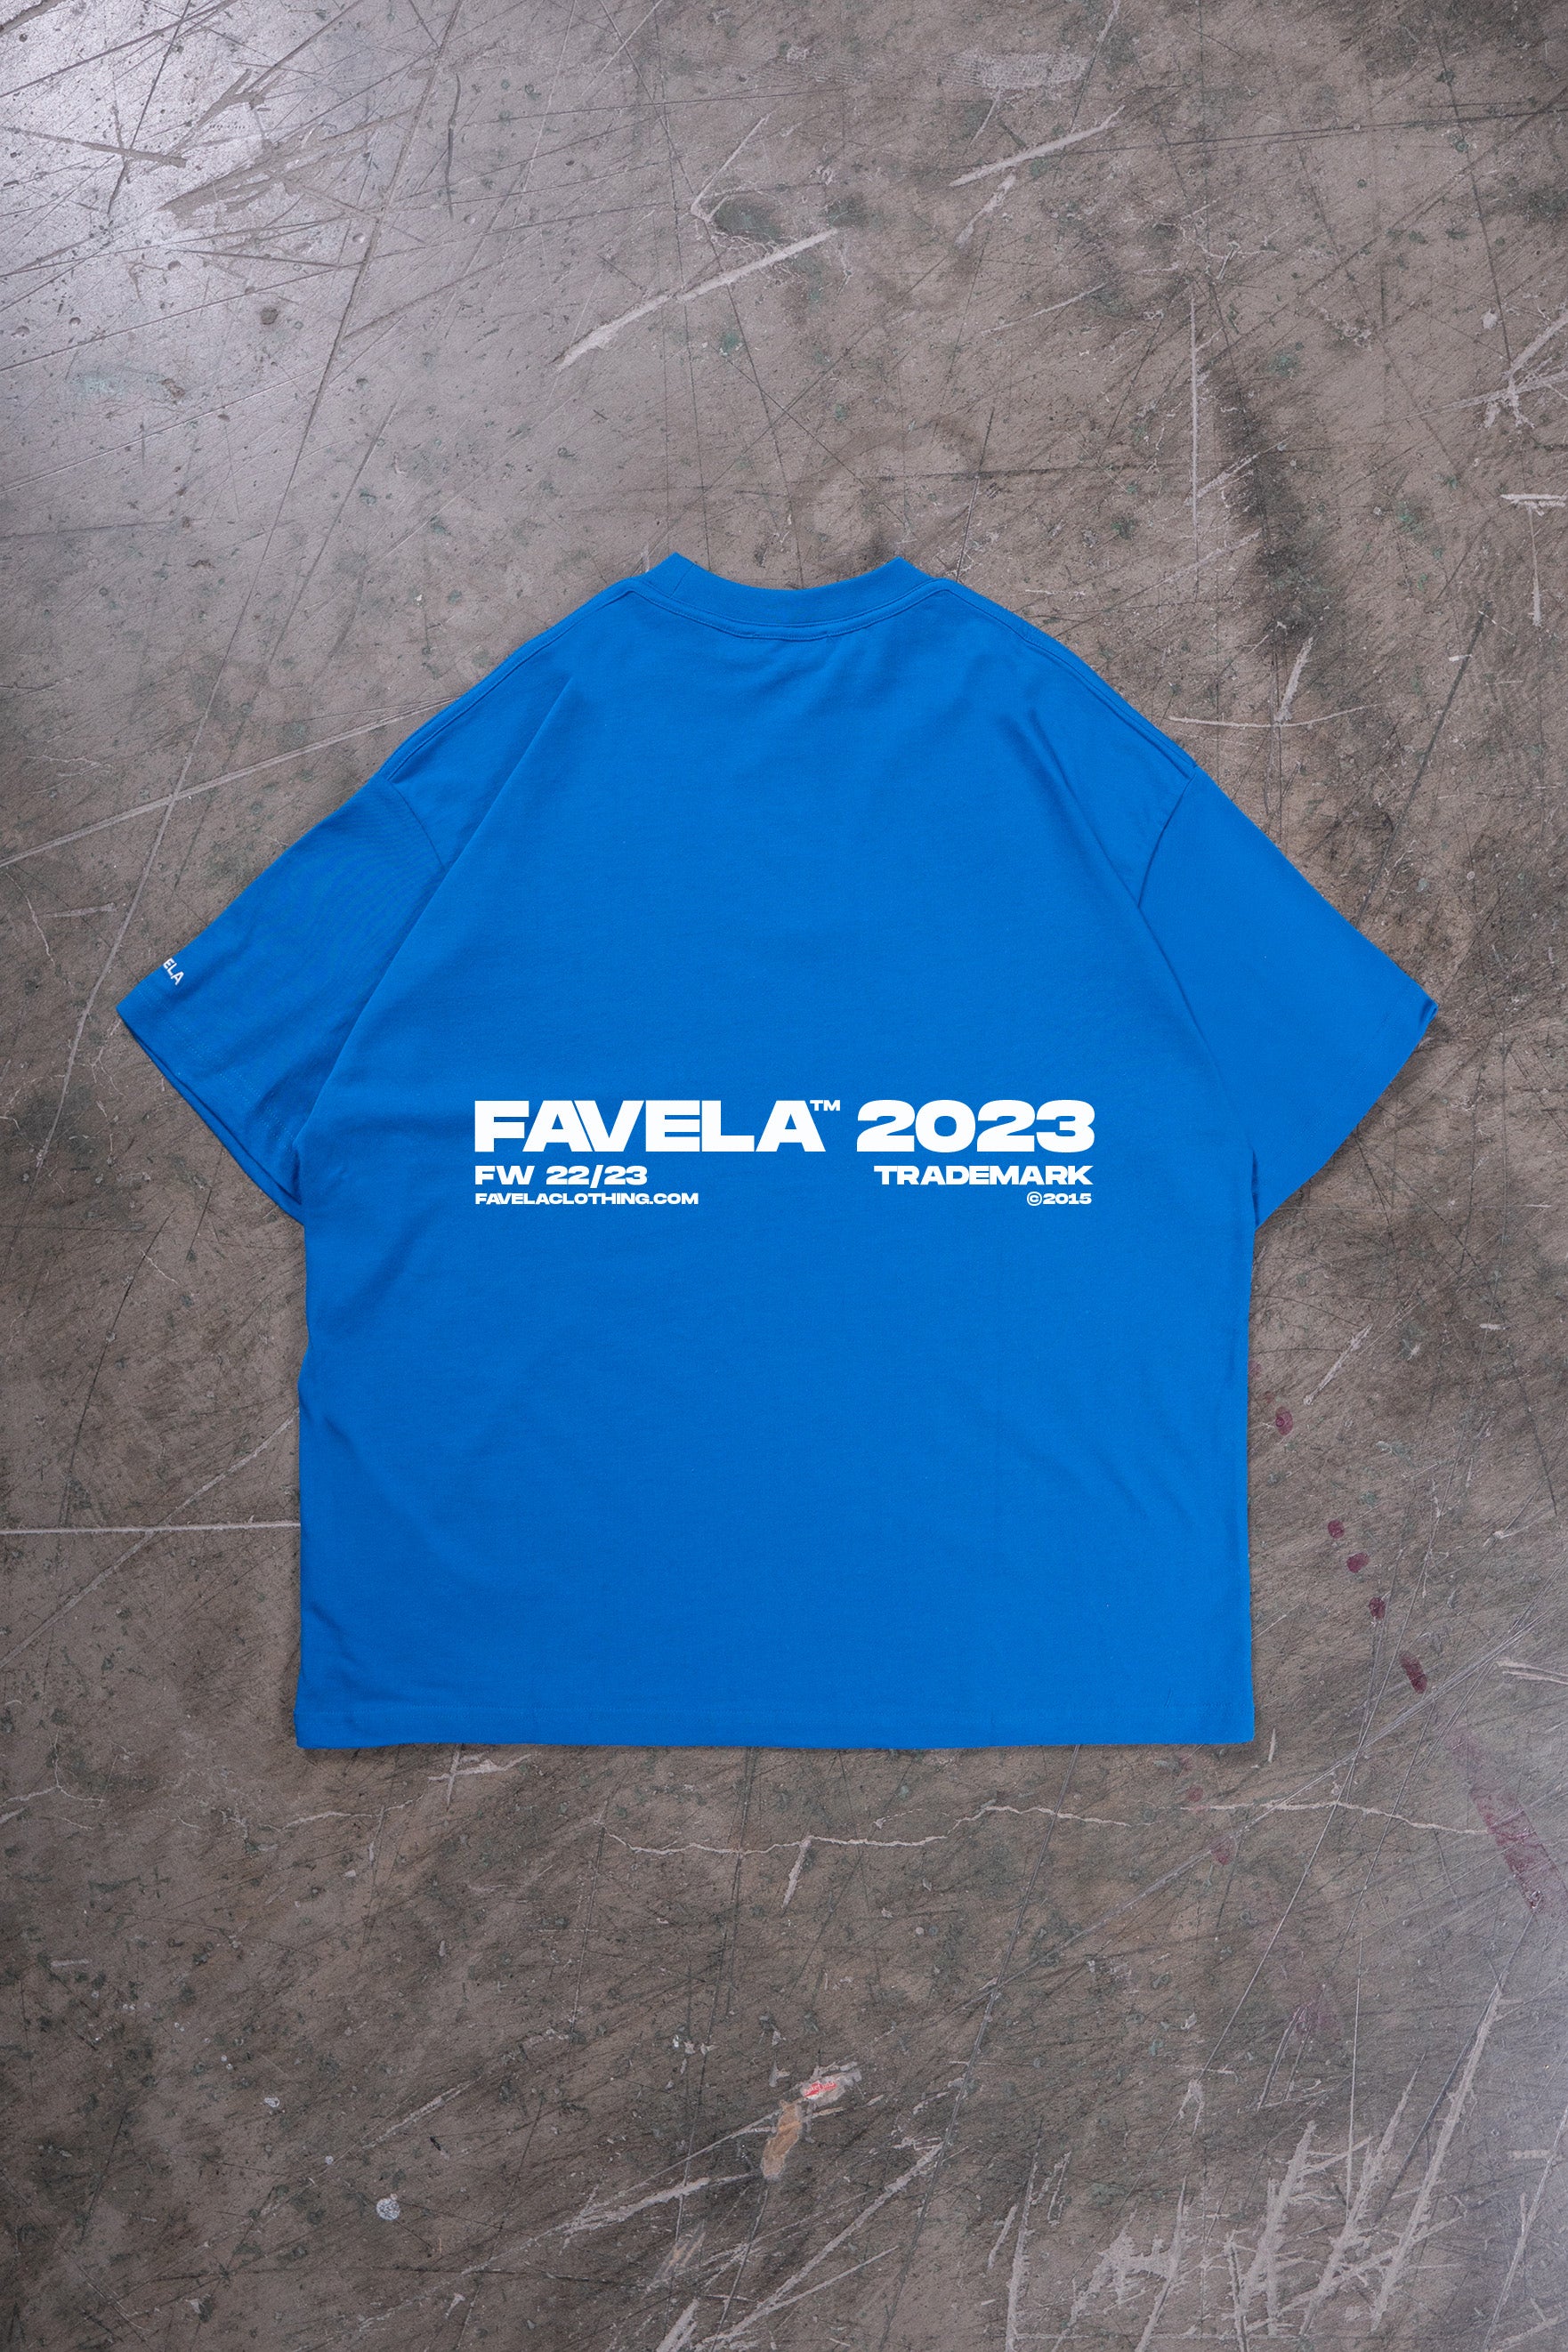 Favela Clothing 2023 T-Shirt Collection. T-Shirt in Royal Blue